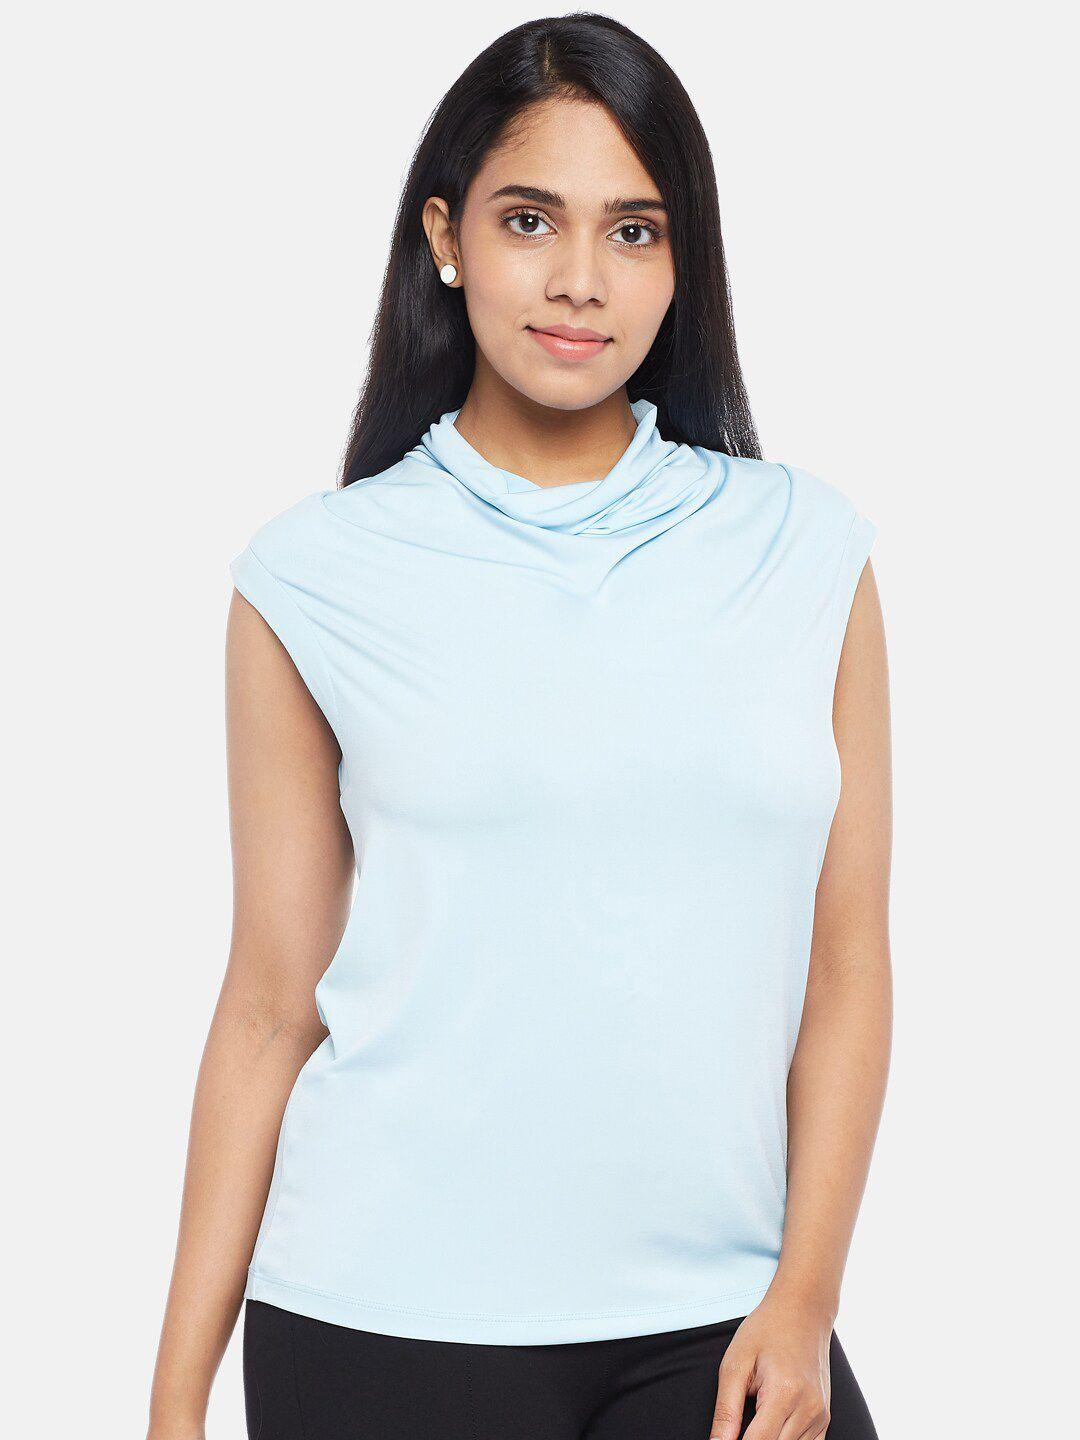 annabelle by pantaloons women turquoise blue solid cowl neck sleeveless regular top